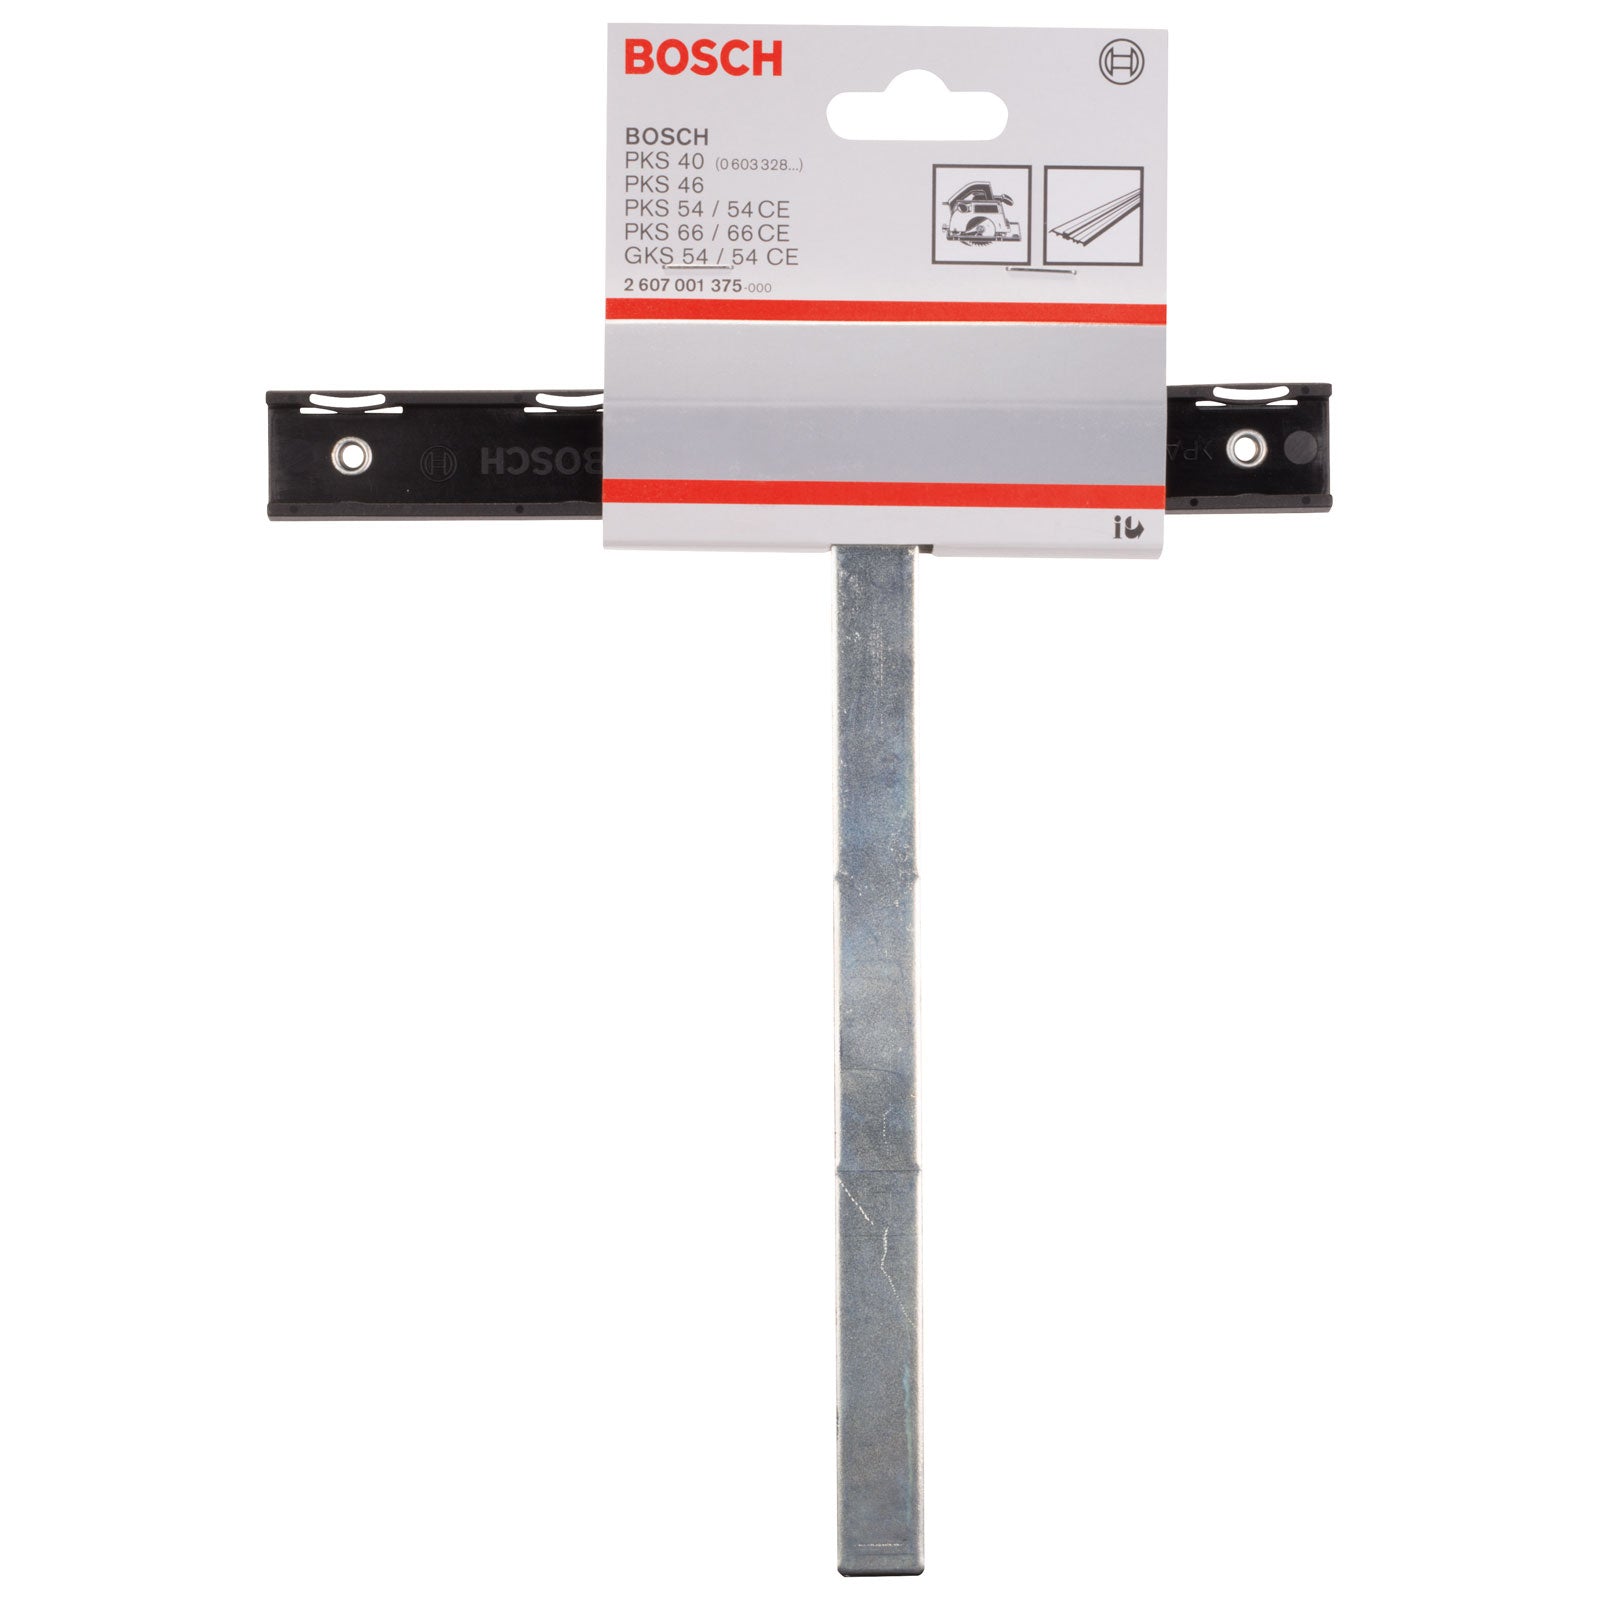 Bosch Parallel Guide for GKS 190 2607001375 Power Tool Services